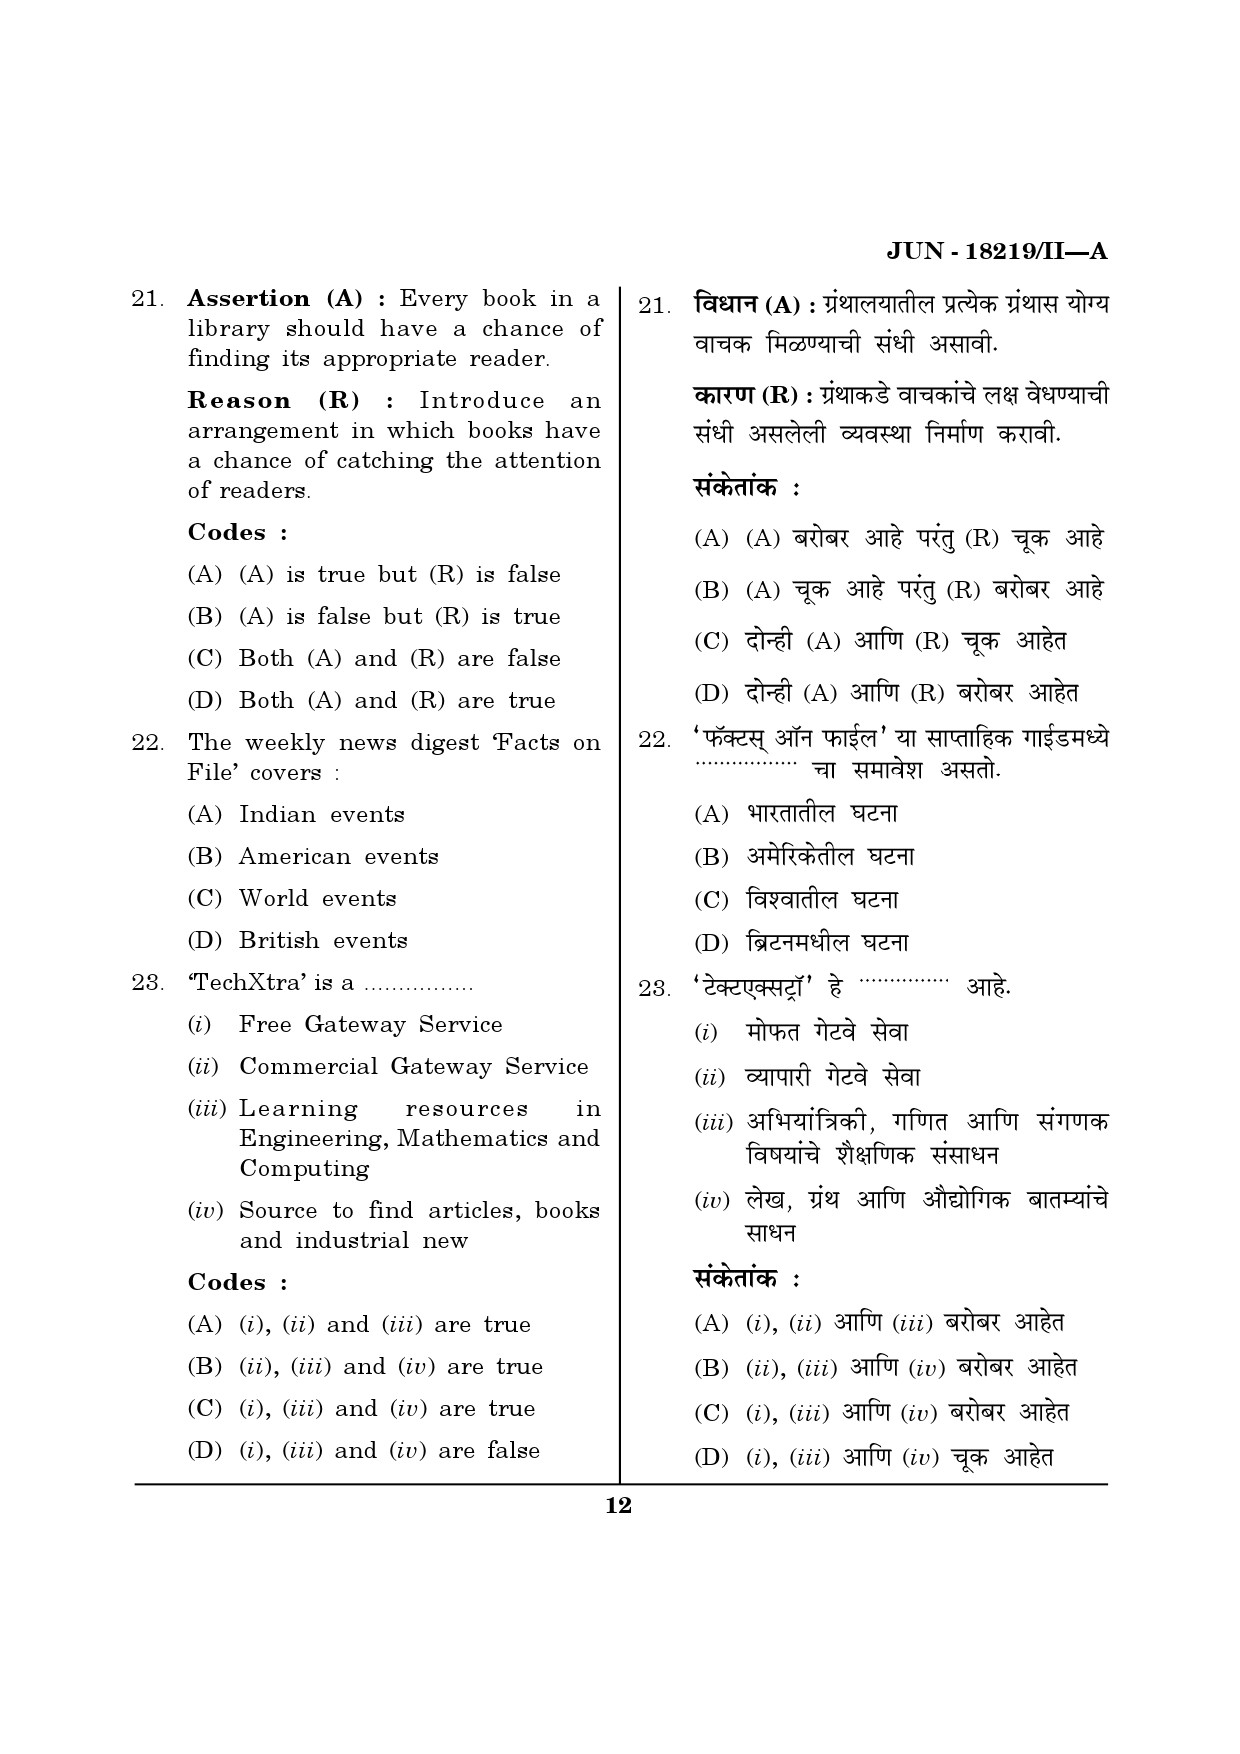 Maharashtra SET Library Information Science Question Paper II June 2019 11